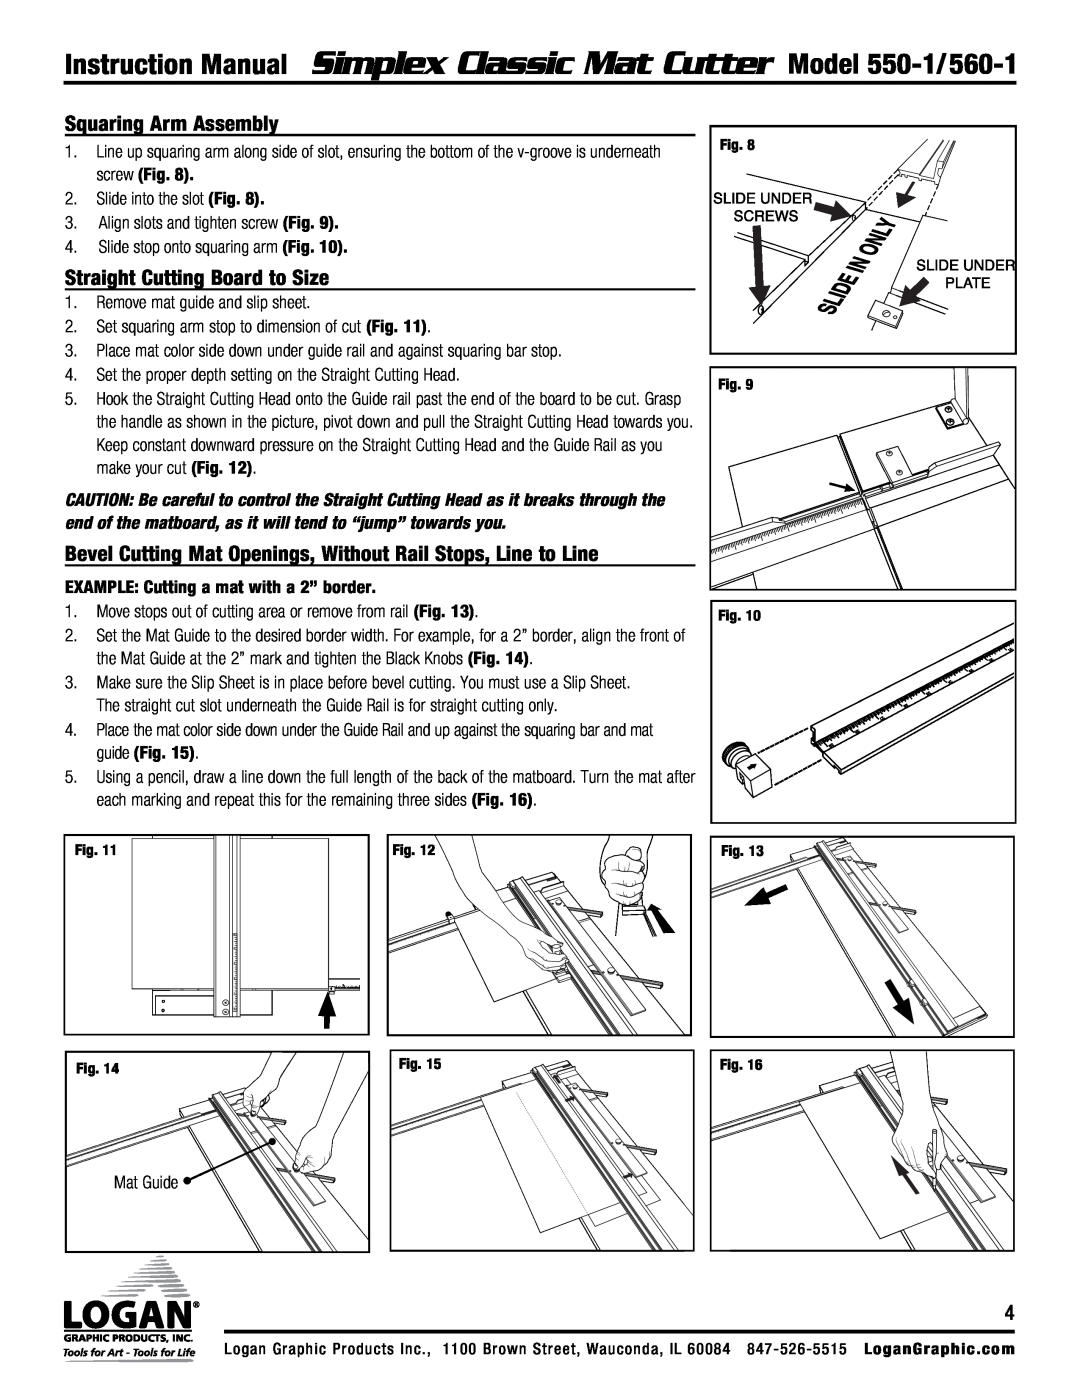 Logan Graphic Products 550-1, 560-1 instruction manual Squaring Arm Assembly, Straight Cutting Board to Size 